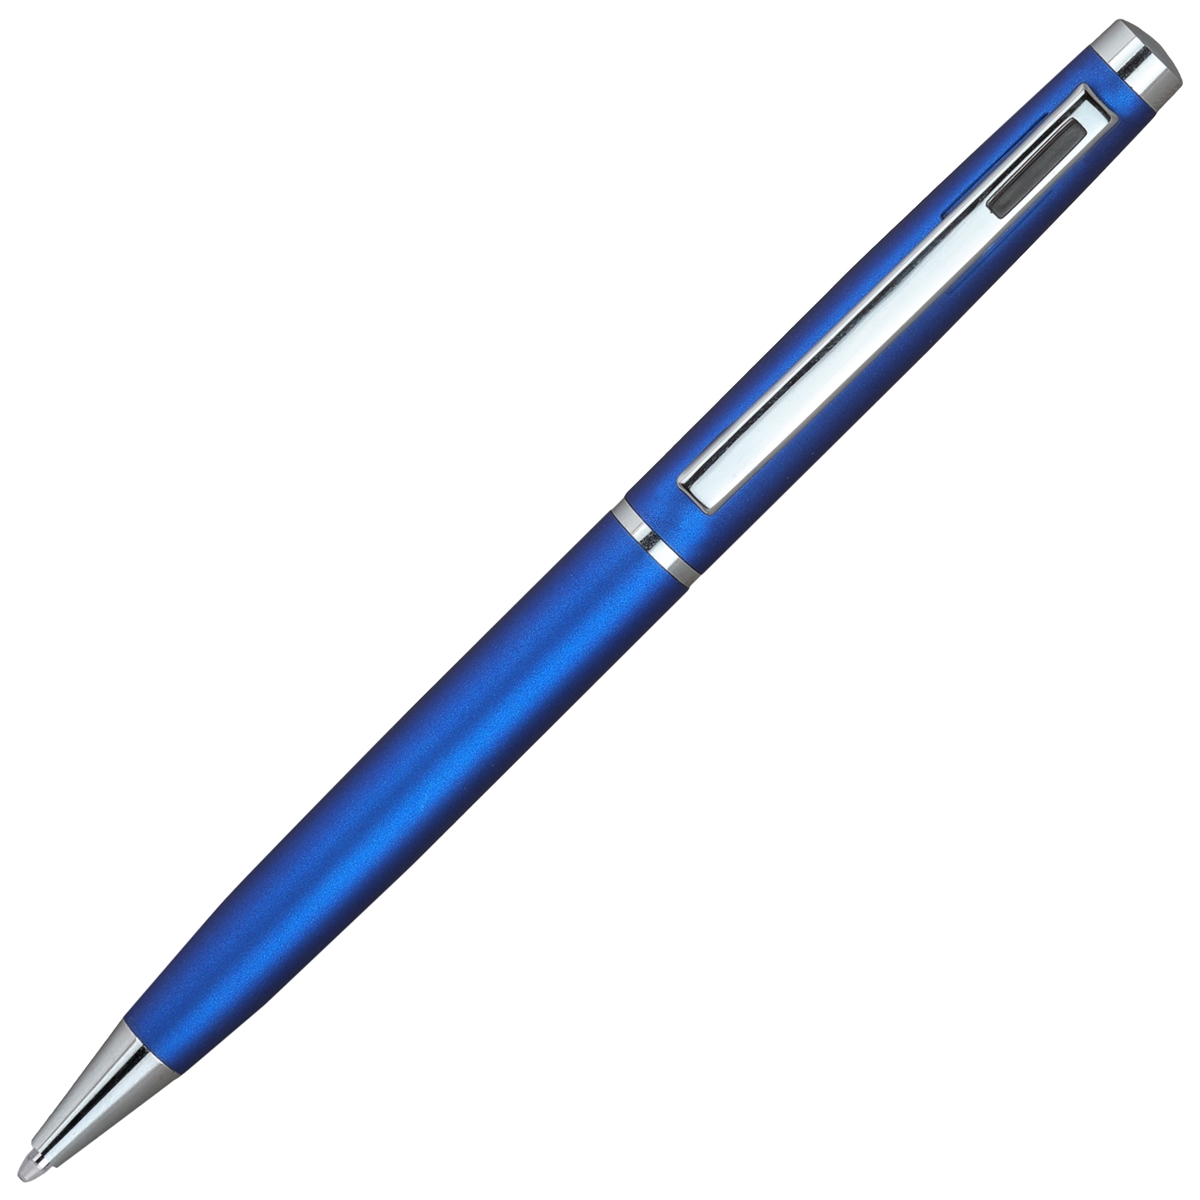 4G Ball Pen – Blue with Black Accents by Lanier Pens